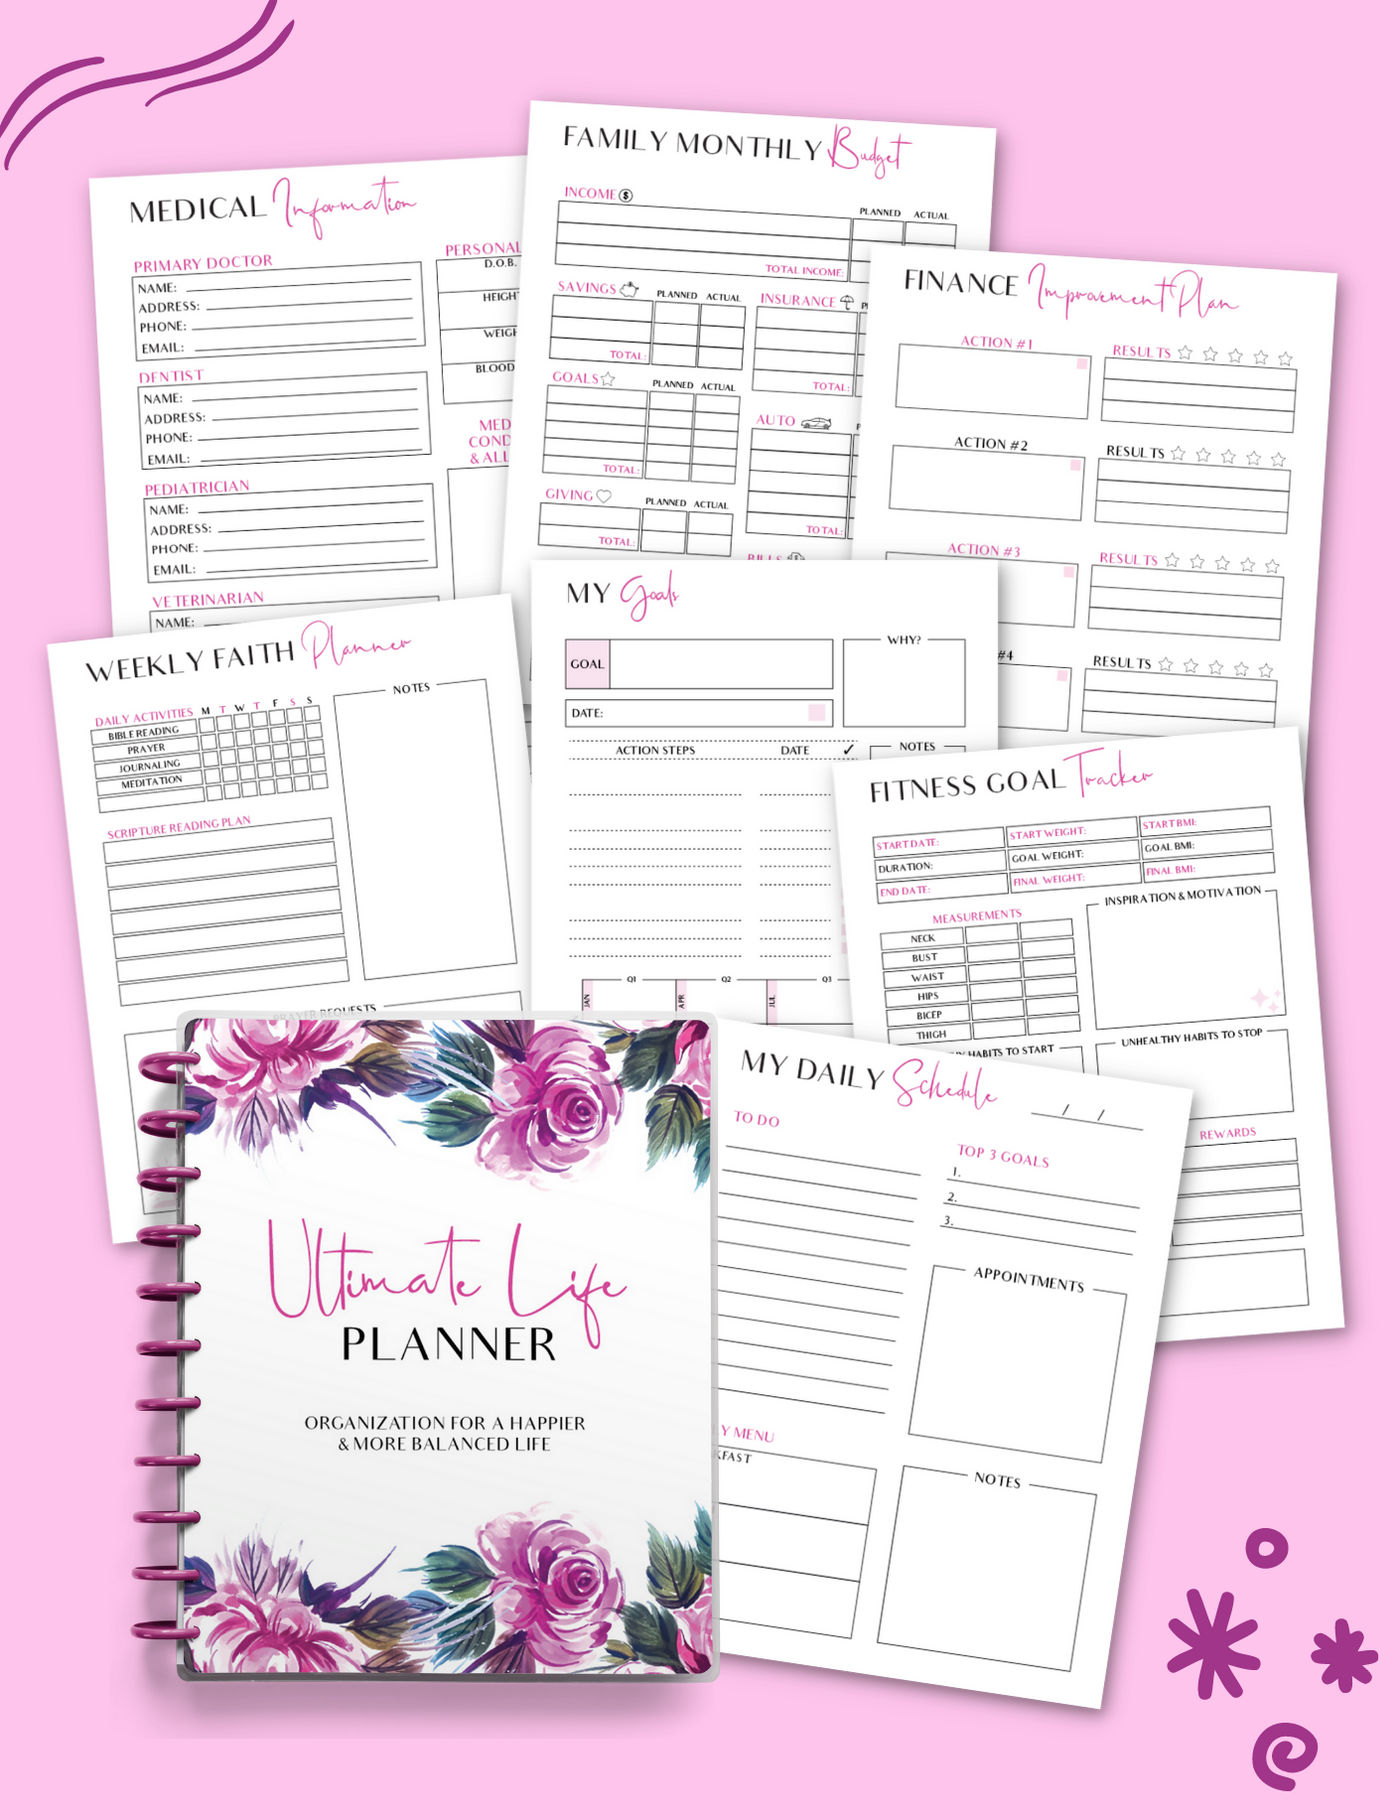 Ultimate Life planner